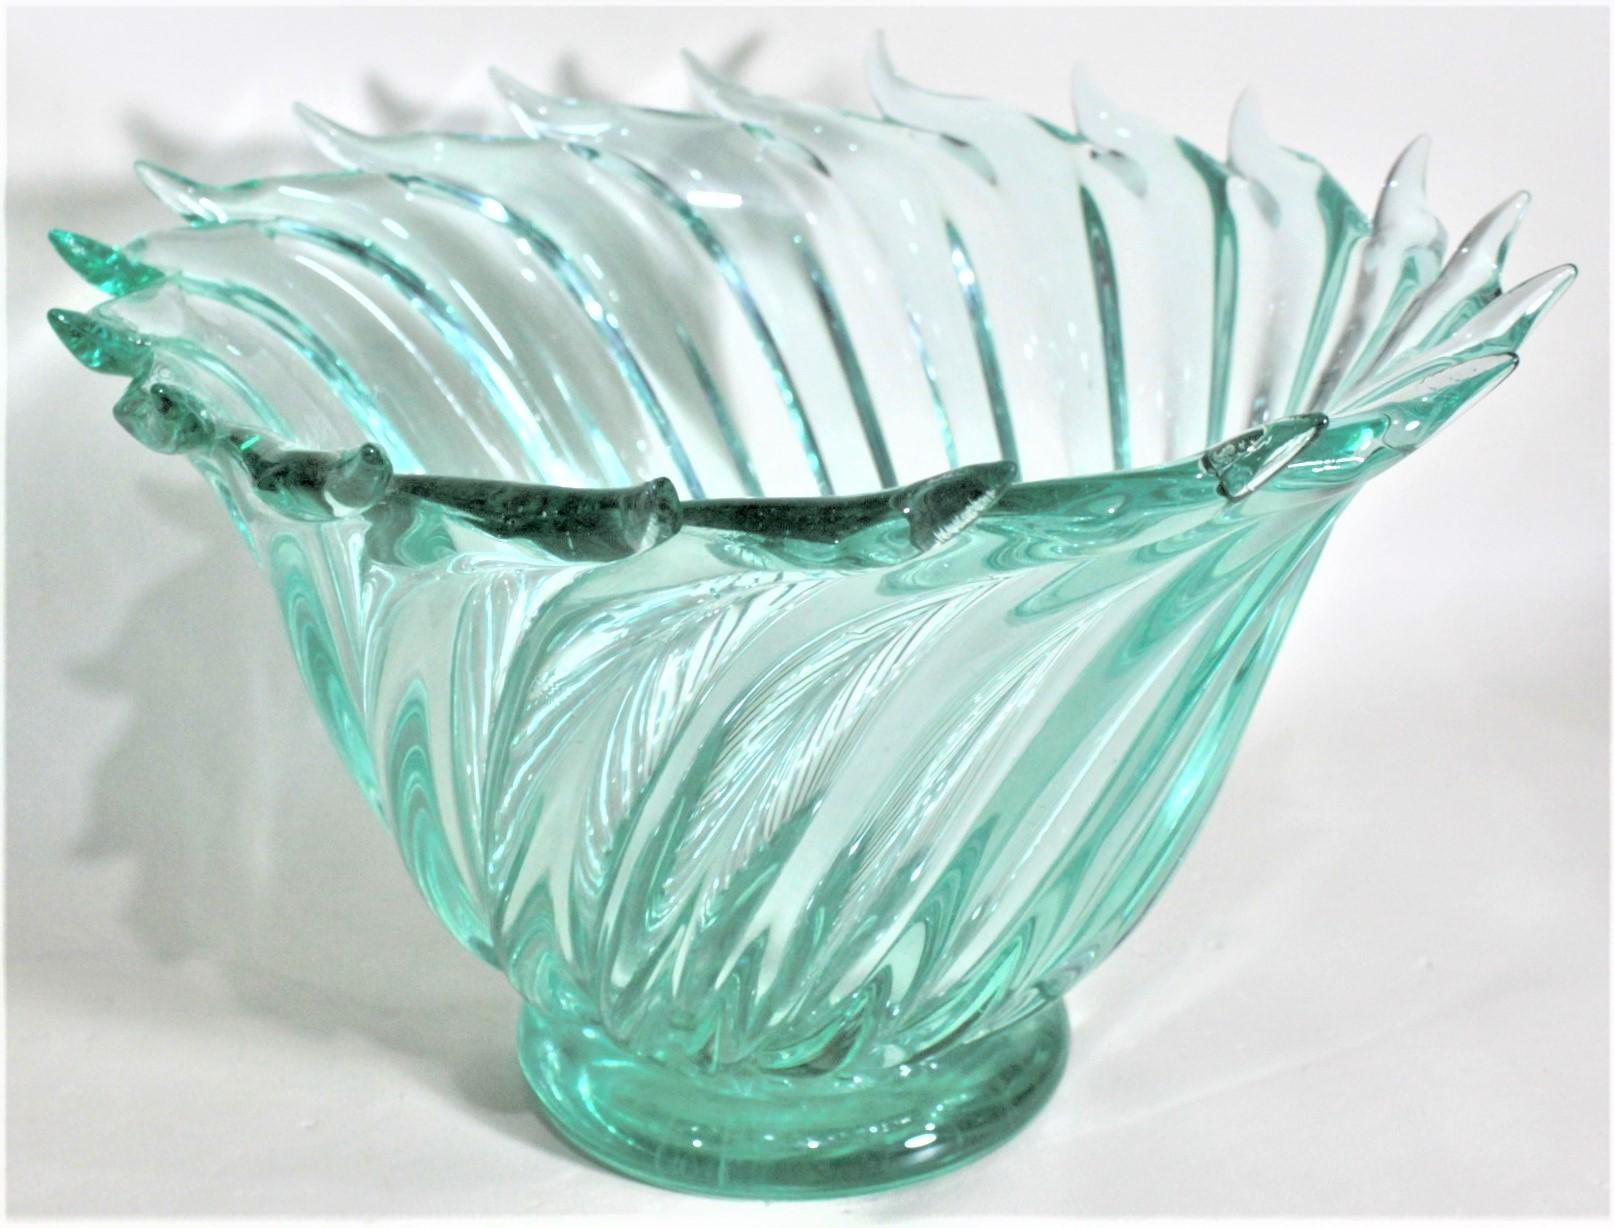 This large green Mid-Century Modern art glass swirled bowl was made in Murano Italy in circa 1965, and very likely by the renowned glass artist Ercole Barovier. The bowl is a series of swirled deep green glass that has been crafted in a serpentine